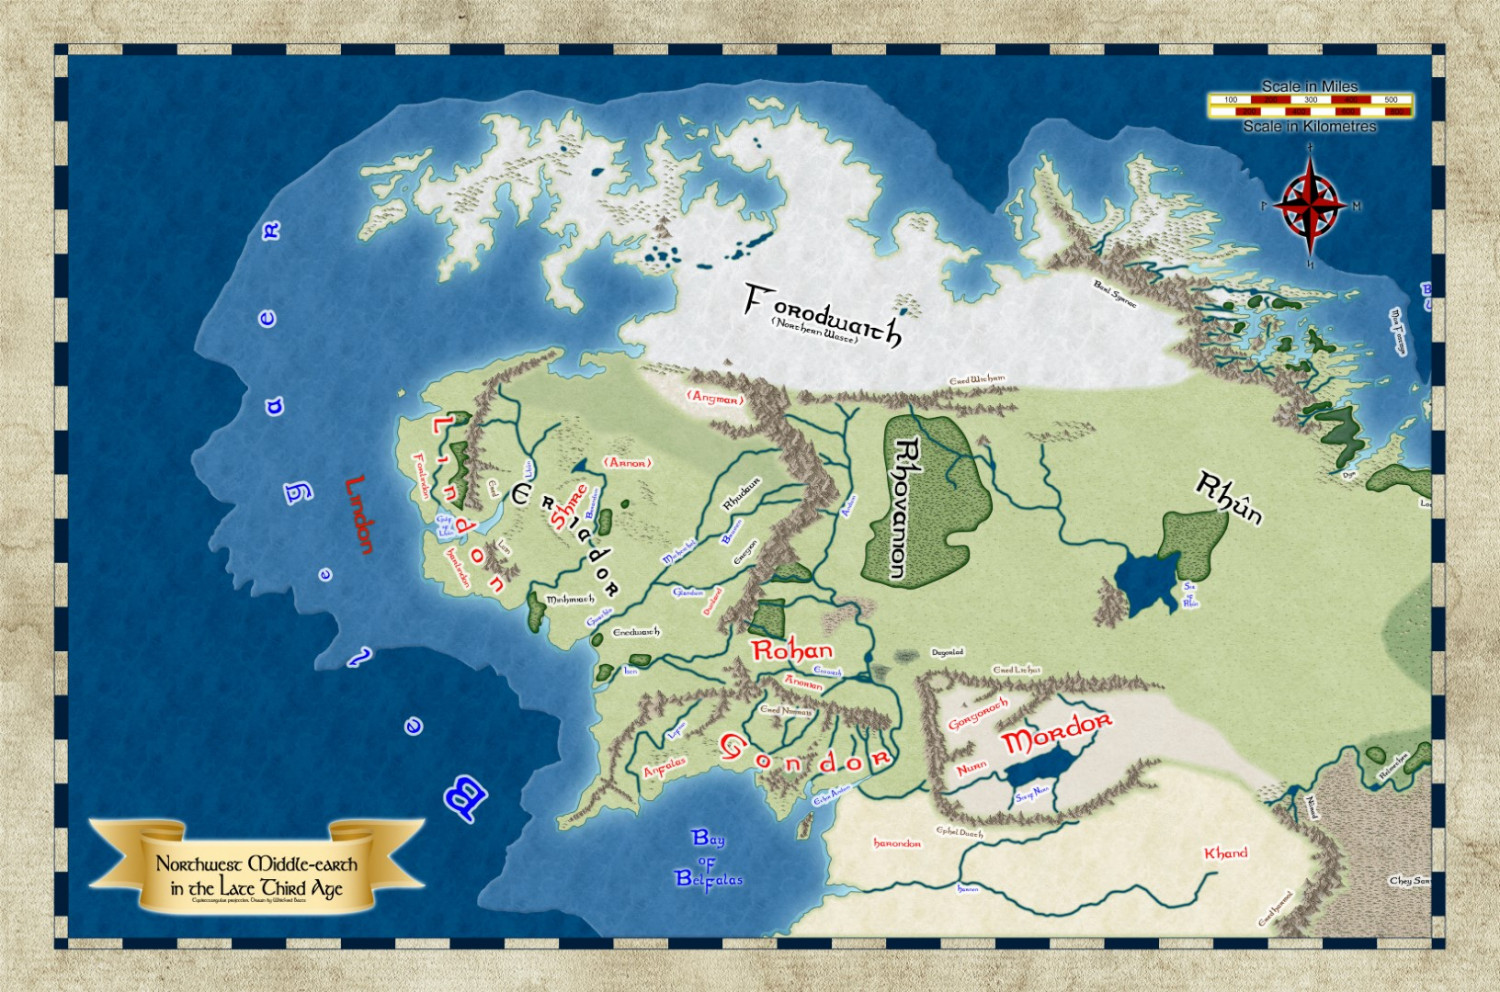 ICE M-E NW (late Third Age) (ancient realms) v1.0wip (Large) (1).JPG